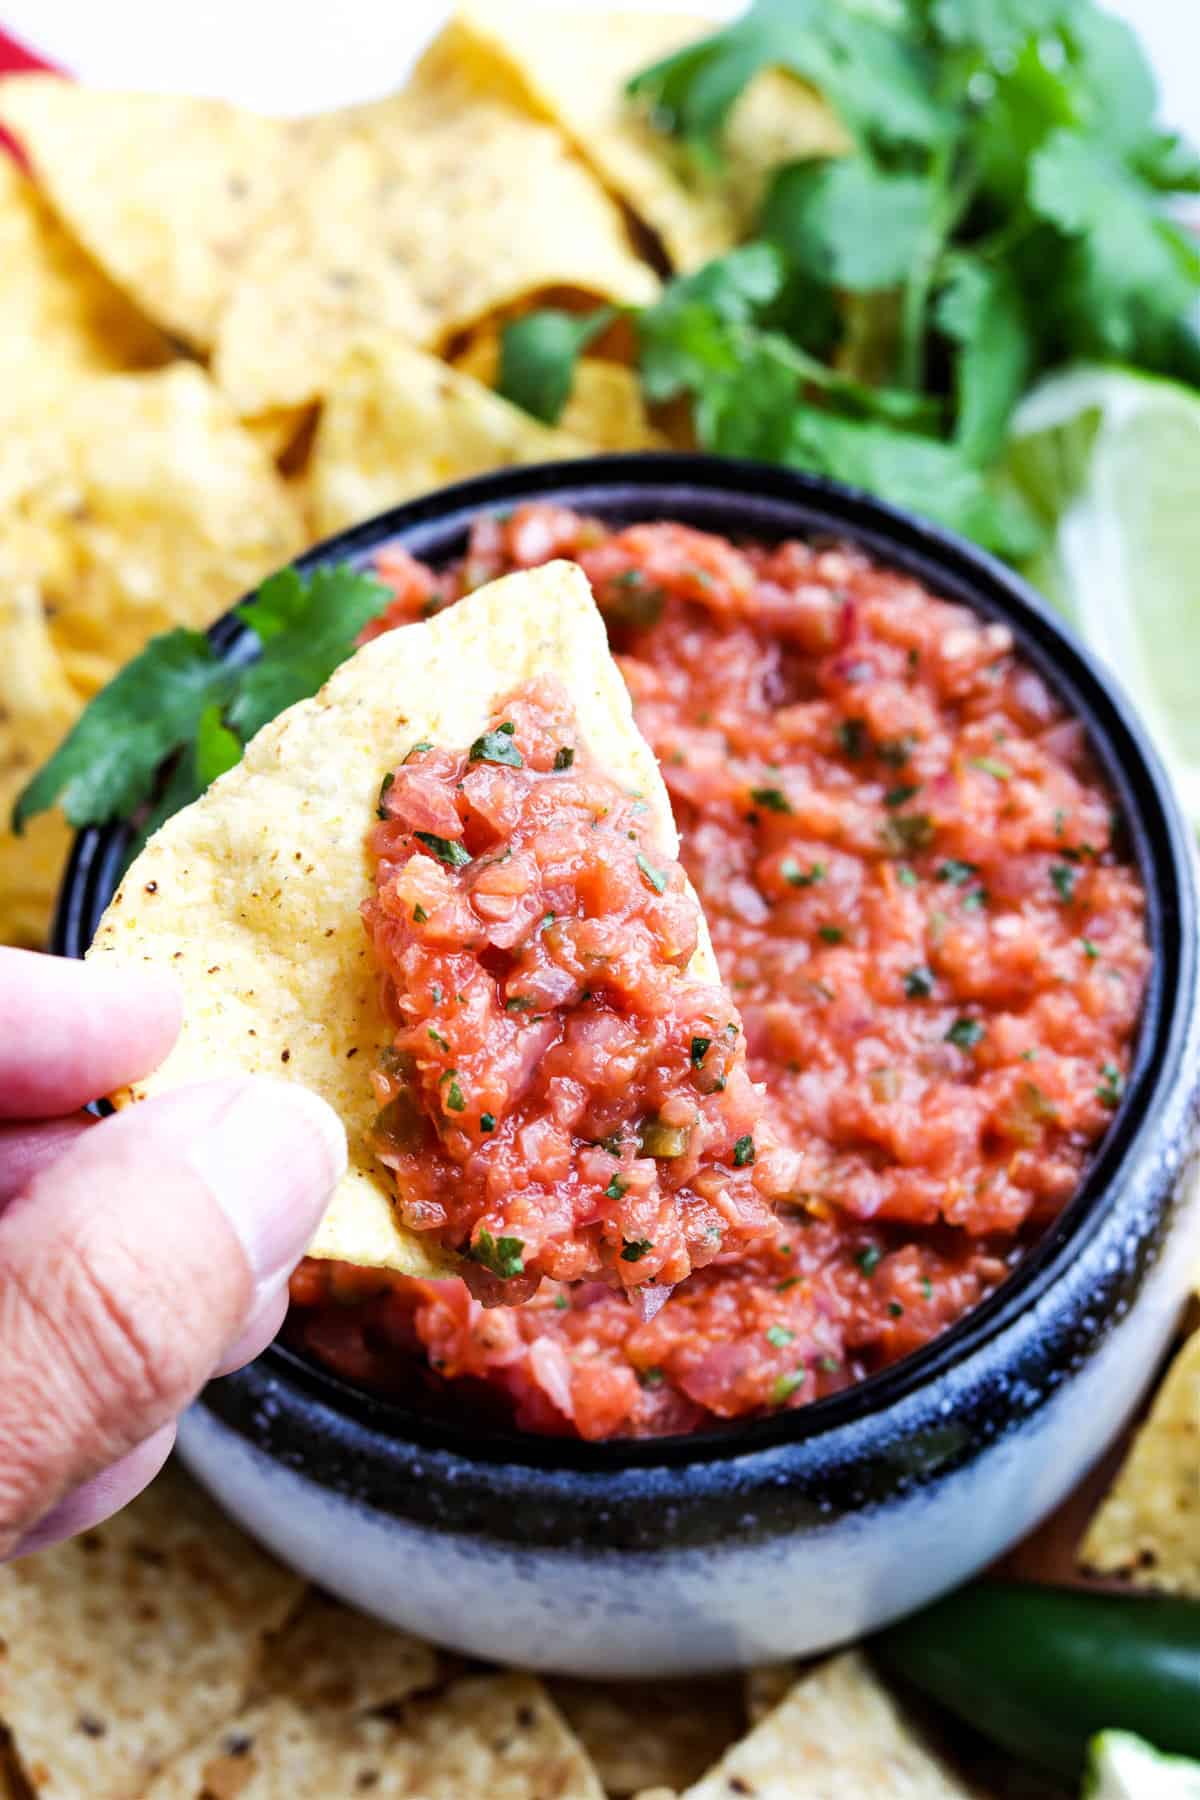 Smoked Salsa Recipe in Bowl with Tortilla Dipping Chip